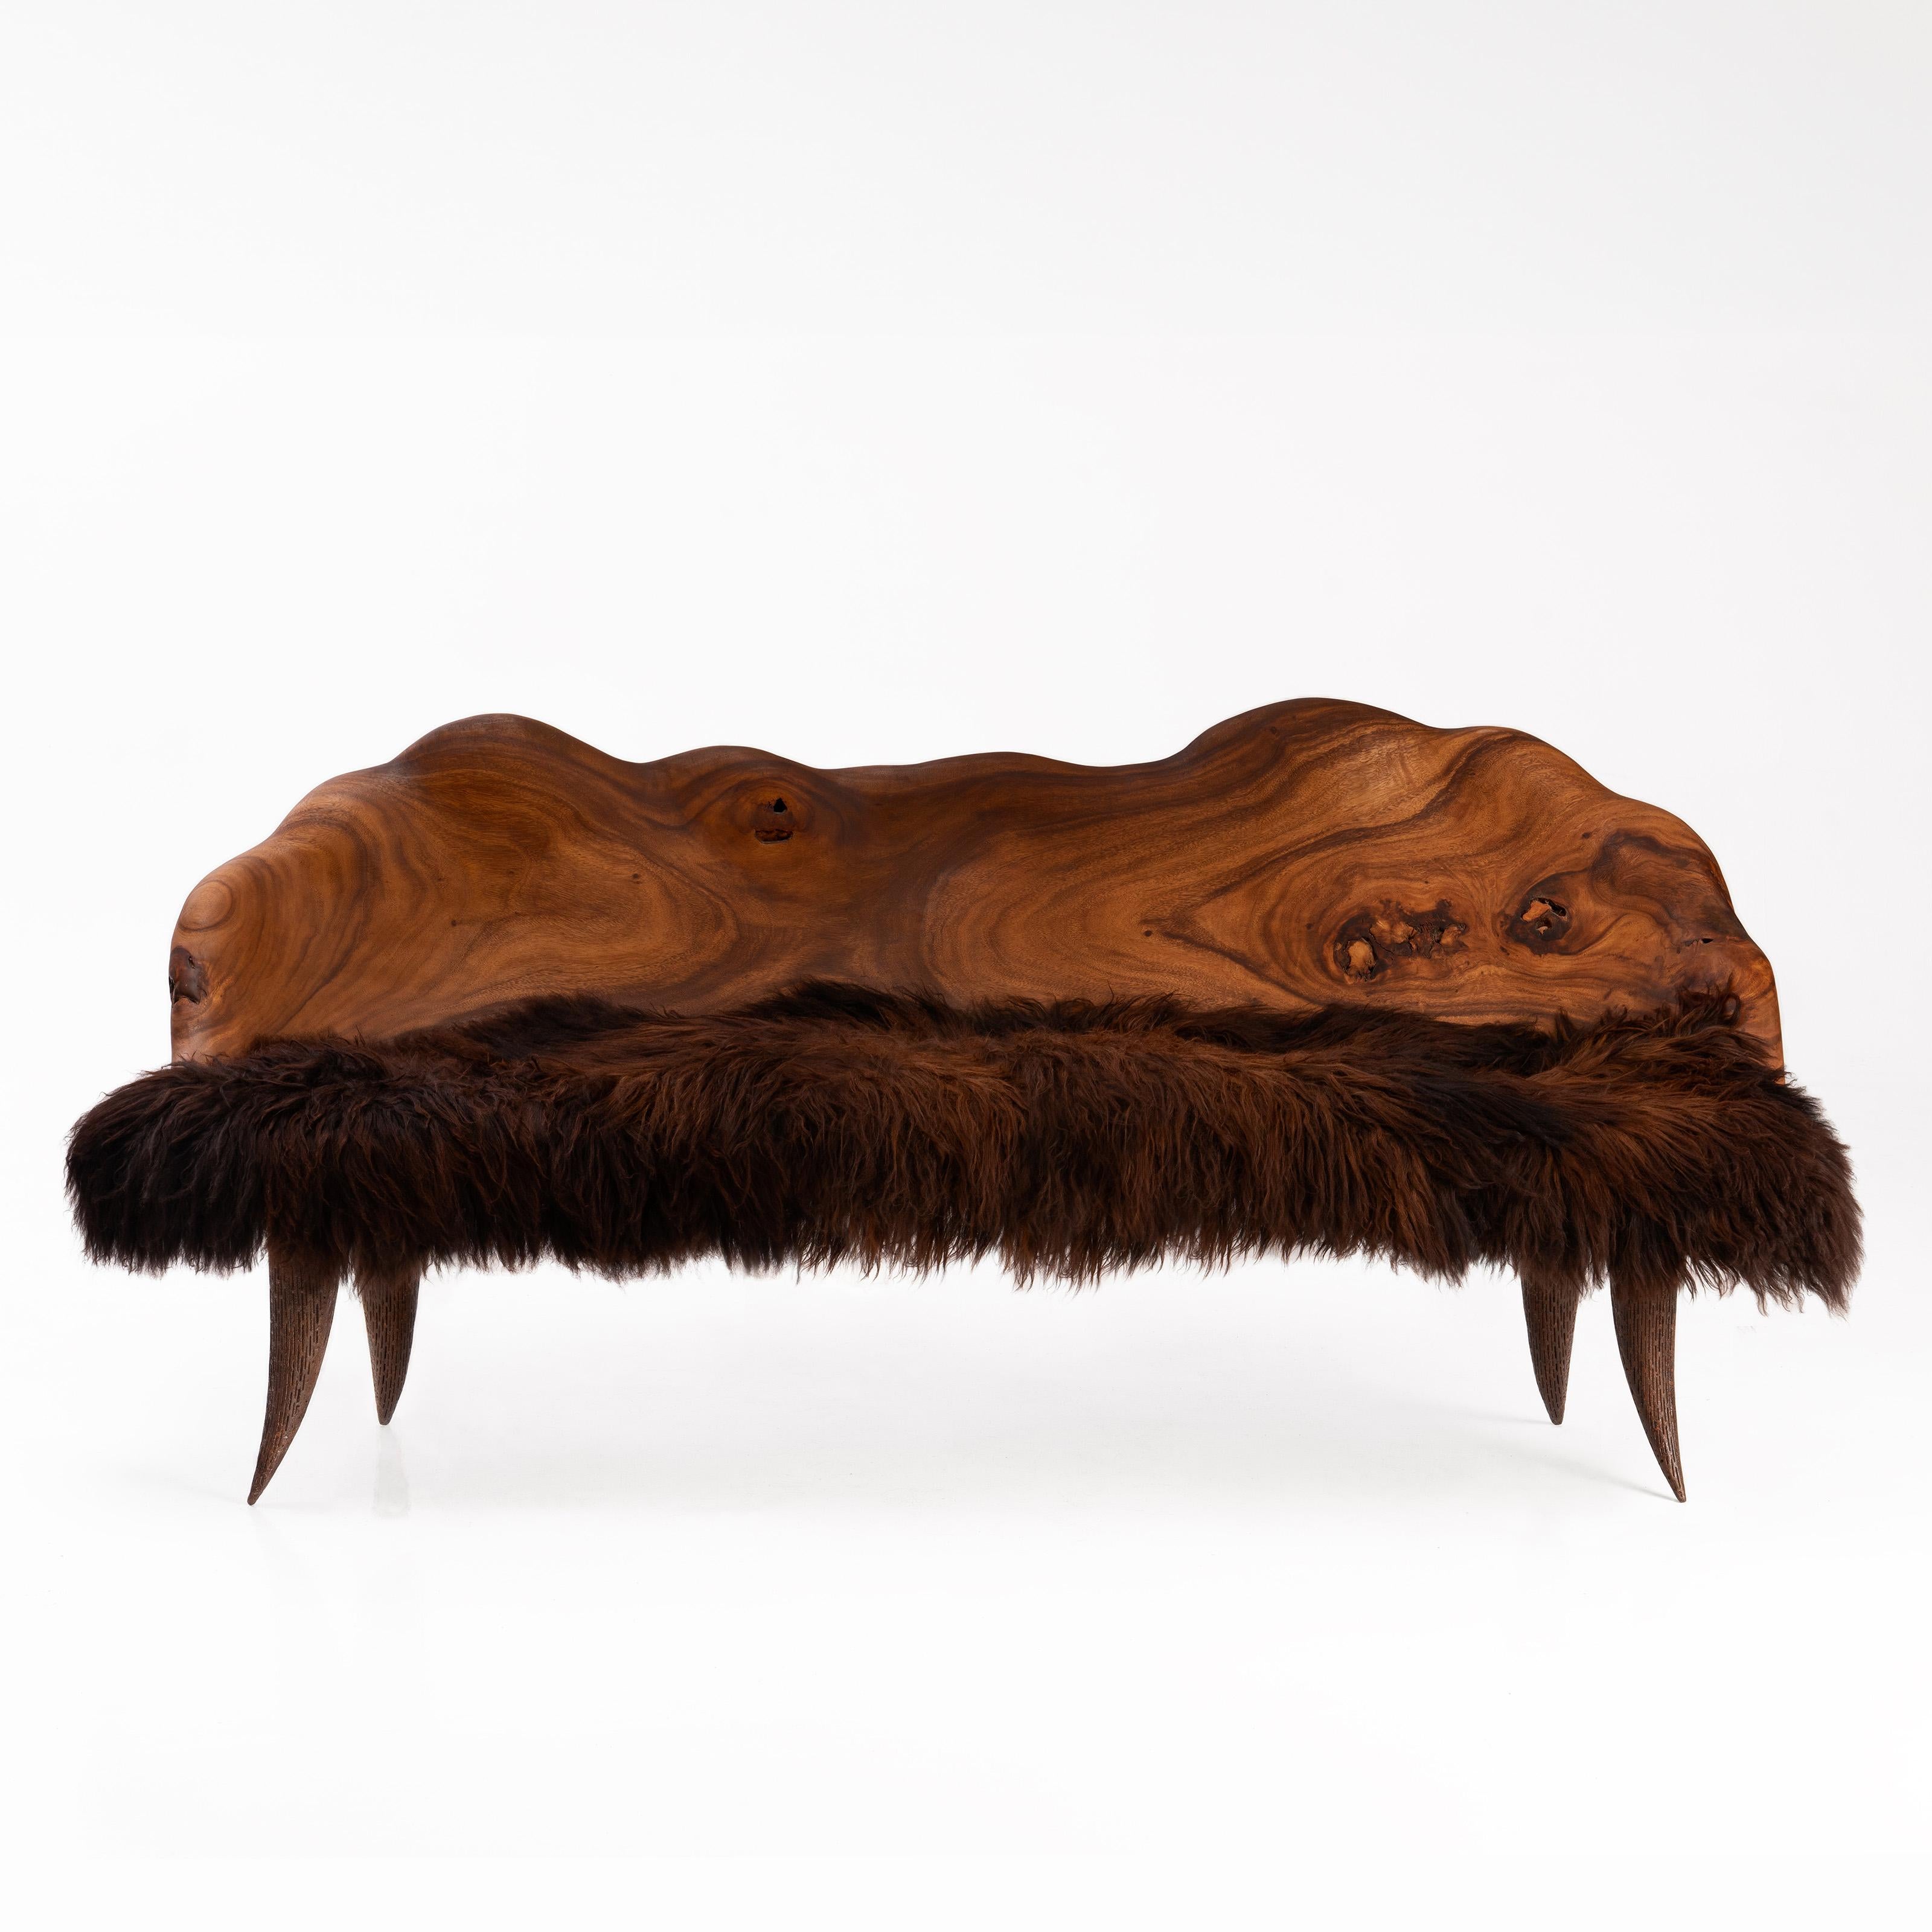 Moonrise Kingdom Bench by Odditi
Dimensions: W 195 x D 60 x H 100 cm
Materials: Acacia Wood, Sheepskin

The ‘Moonrise Kingdom’ is an organic modern sculptural statement piece. Hand-carved from solid Acacia wood and adorned with luxuriously thick